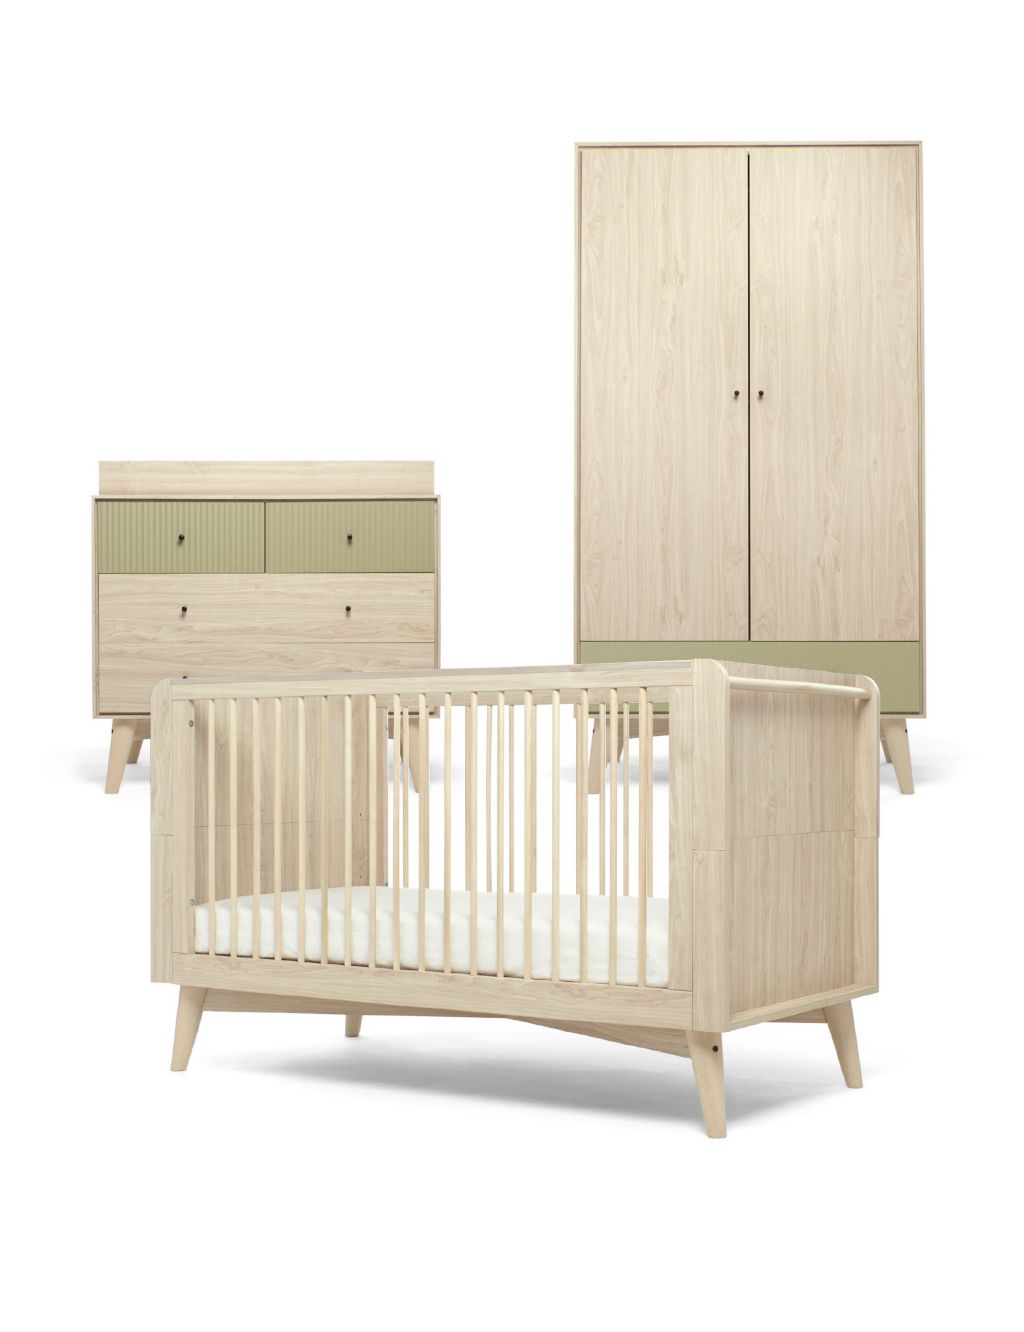 Coxley 3 Piece Cotbed Range with Dresser and Wardrobe image 1